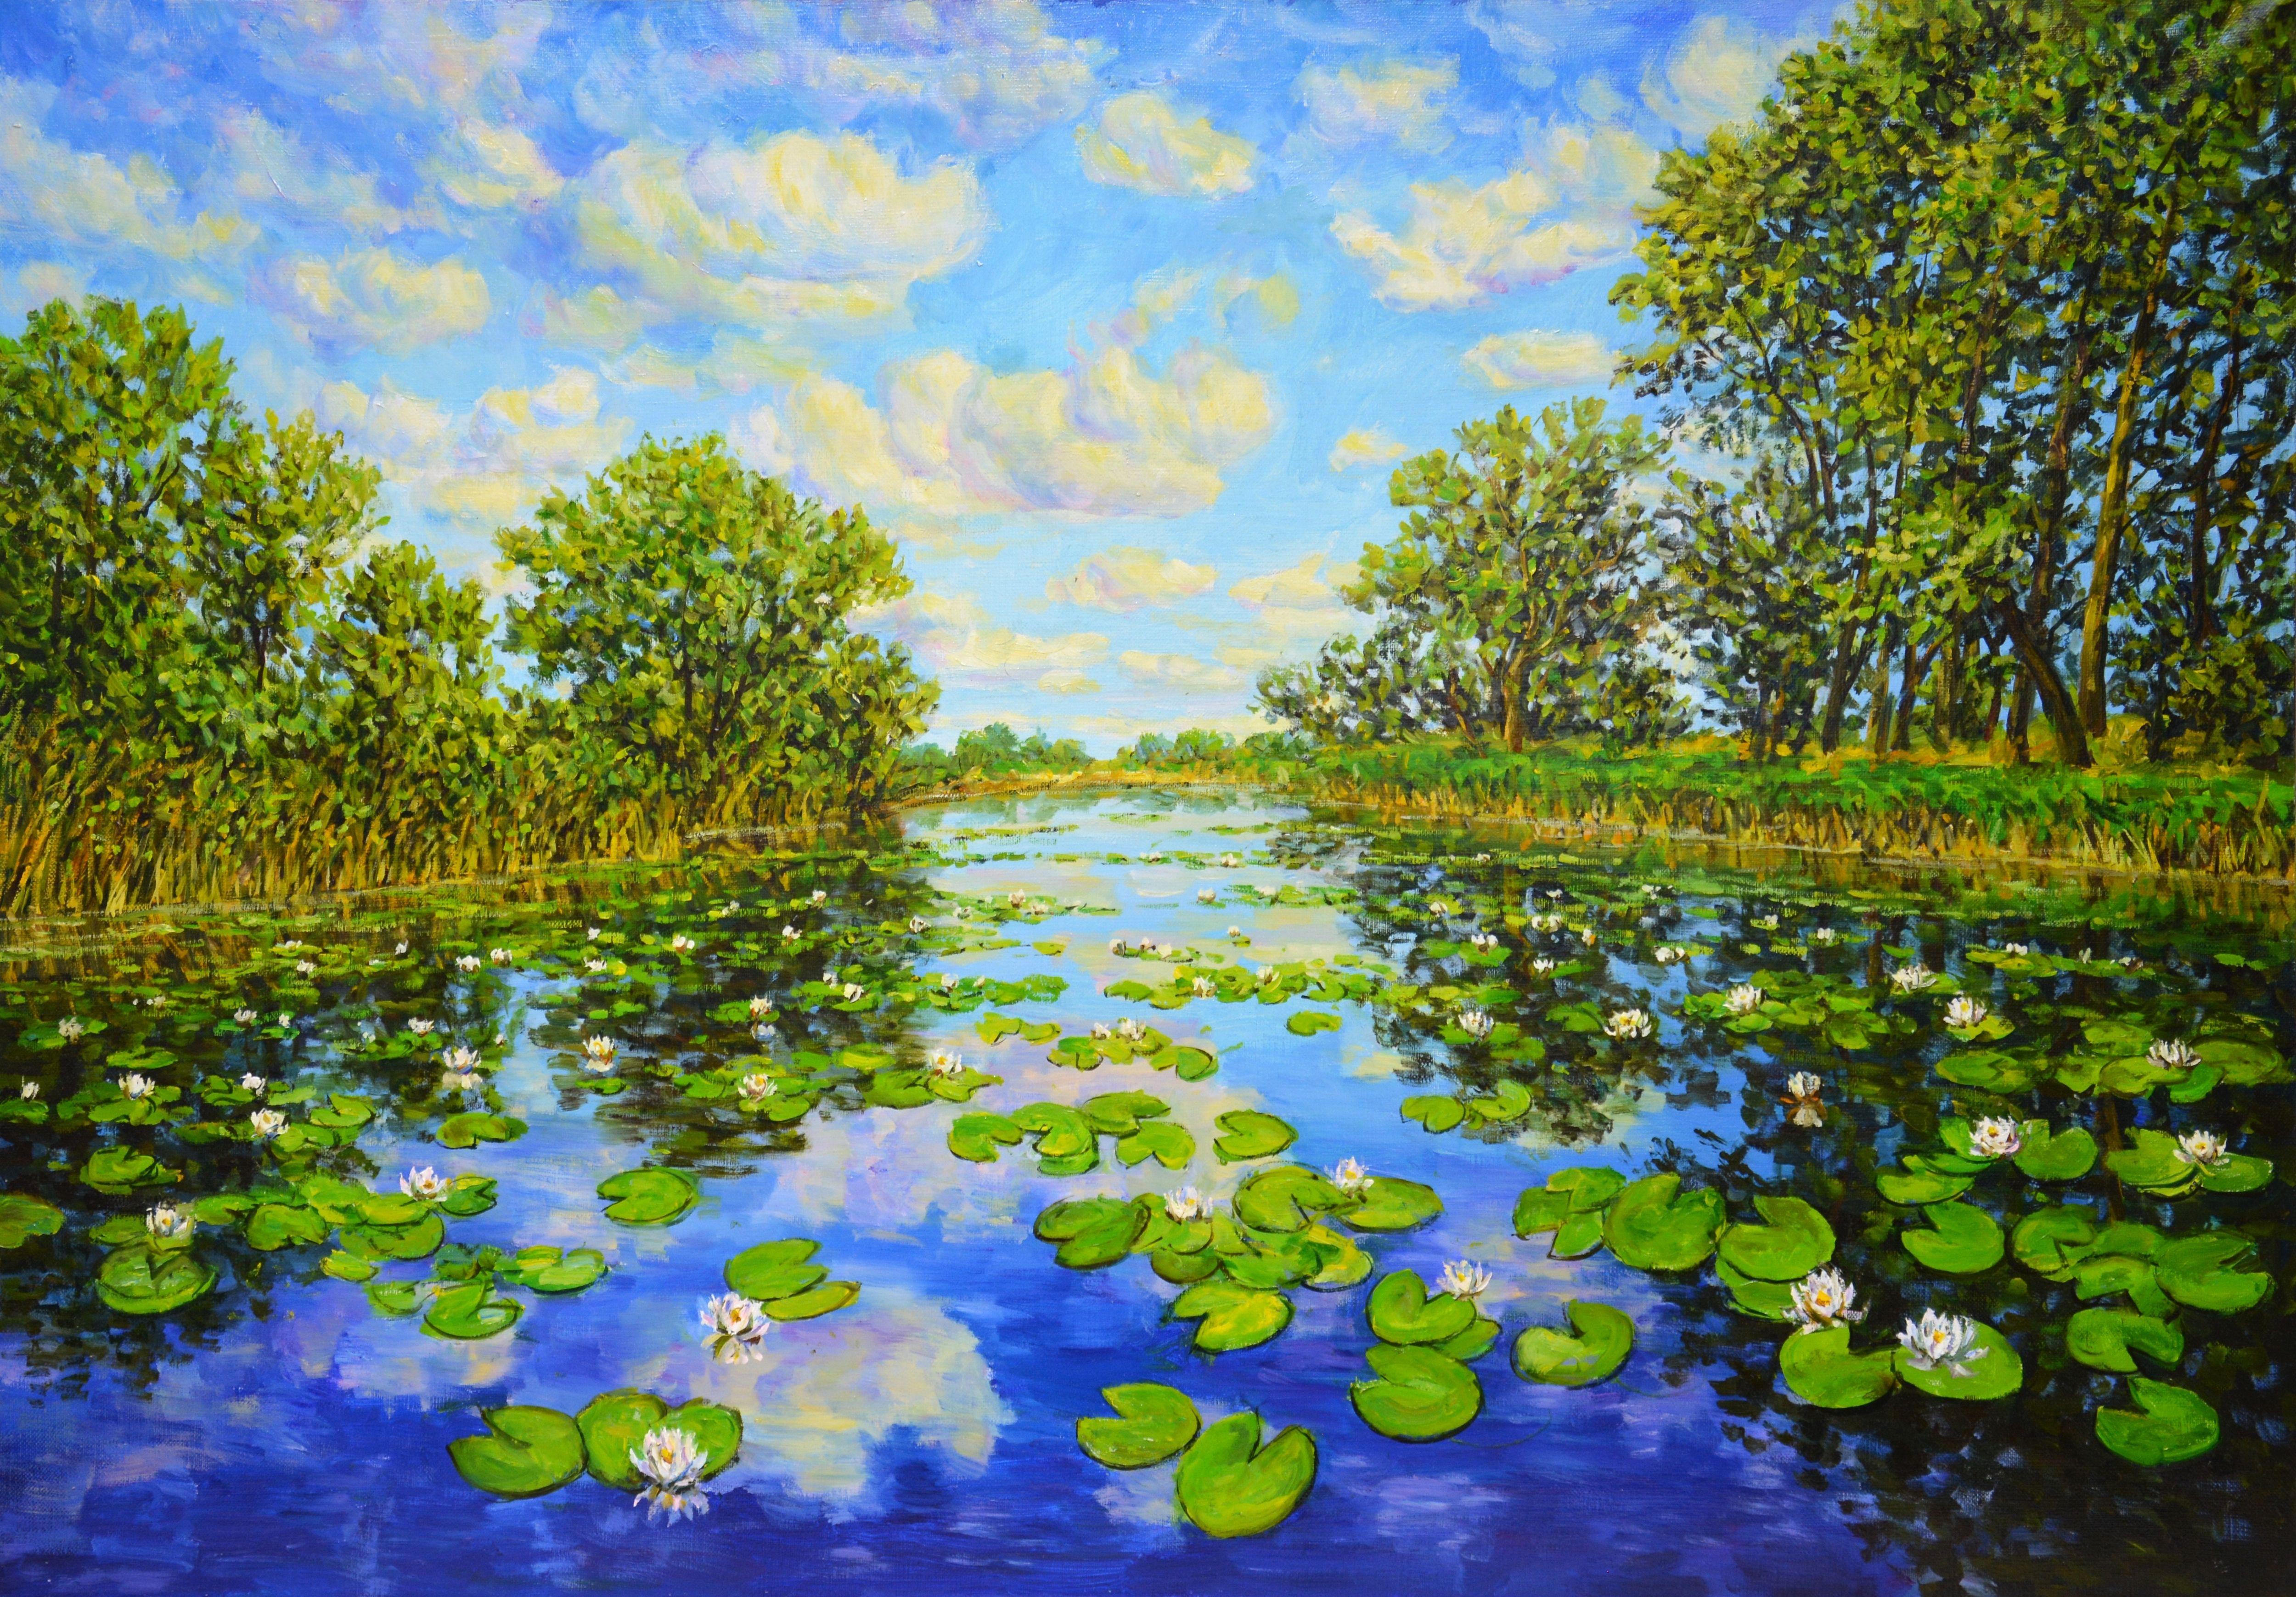 Picture Landscape with water lilies. A rich green palette, lilies on the water, the reflection of the sky in the water, clouds, evoke a feeling of love and gratitude to nature. The picture has good spatial quality, and the colors evoke children's